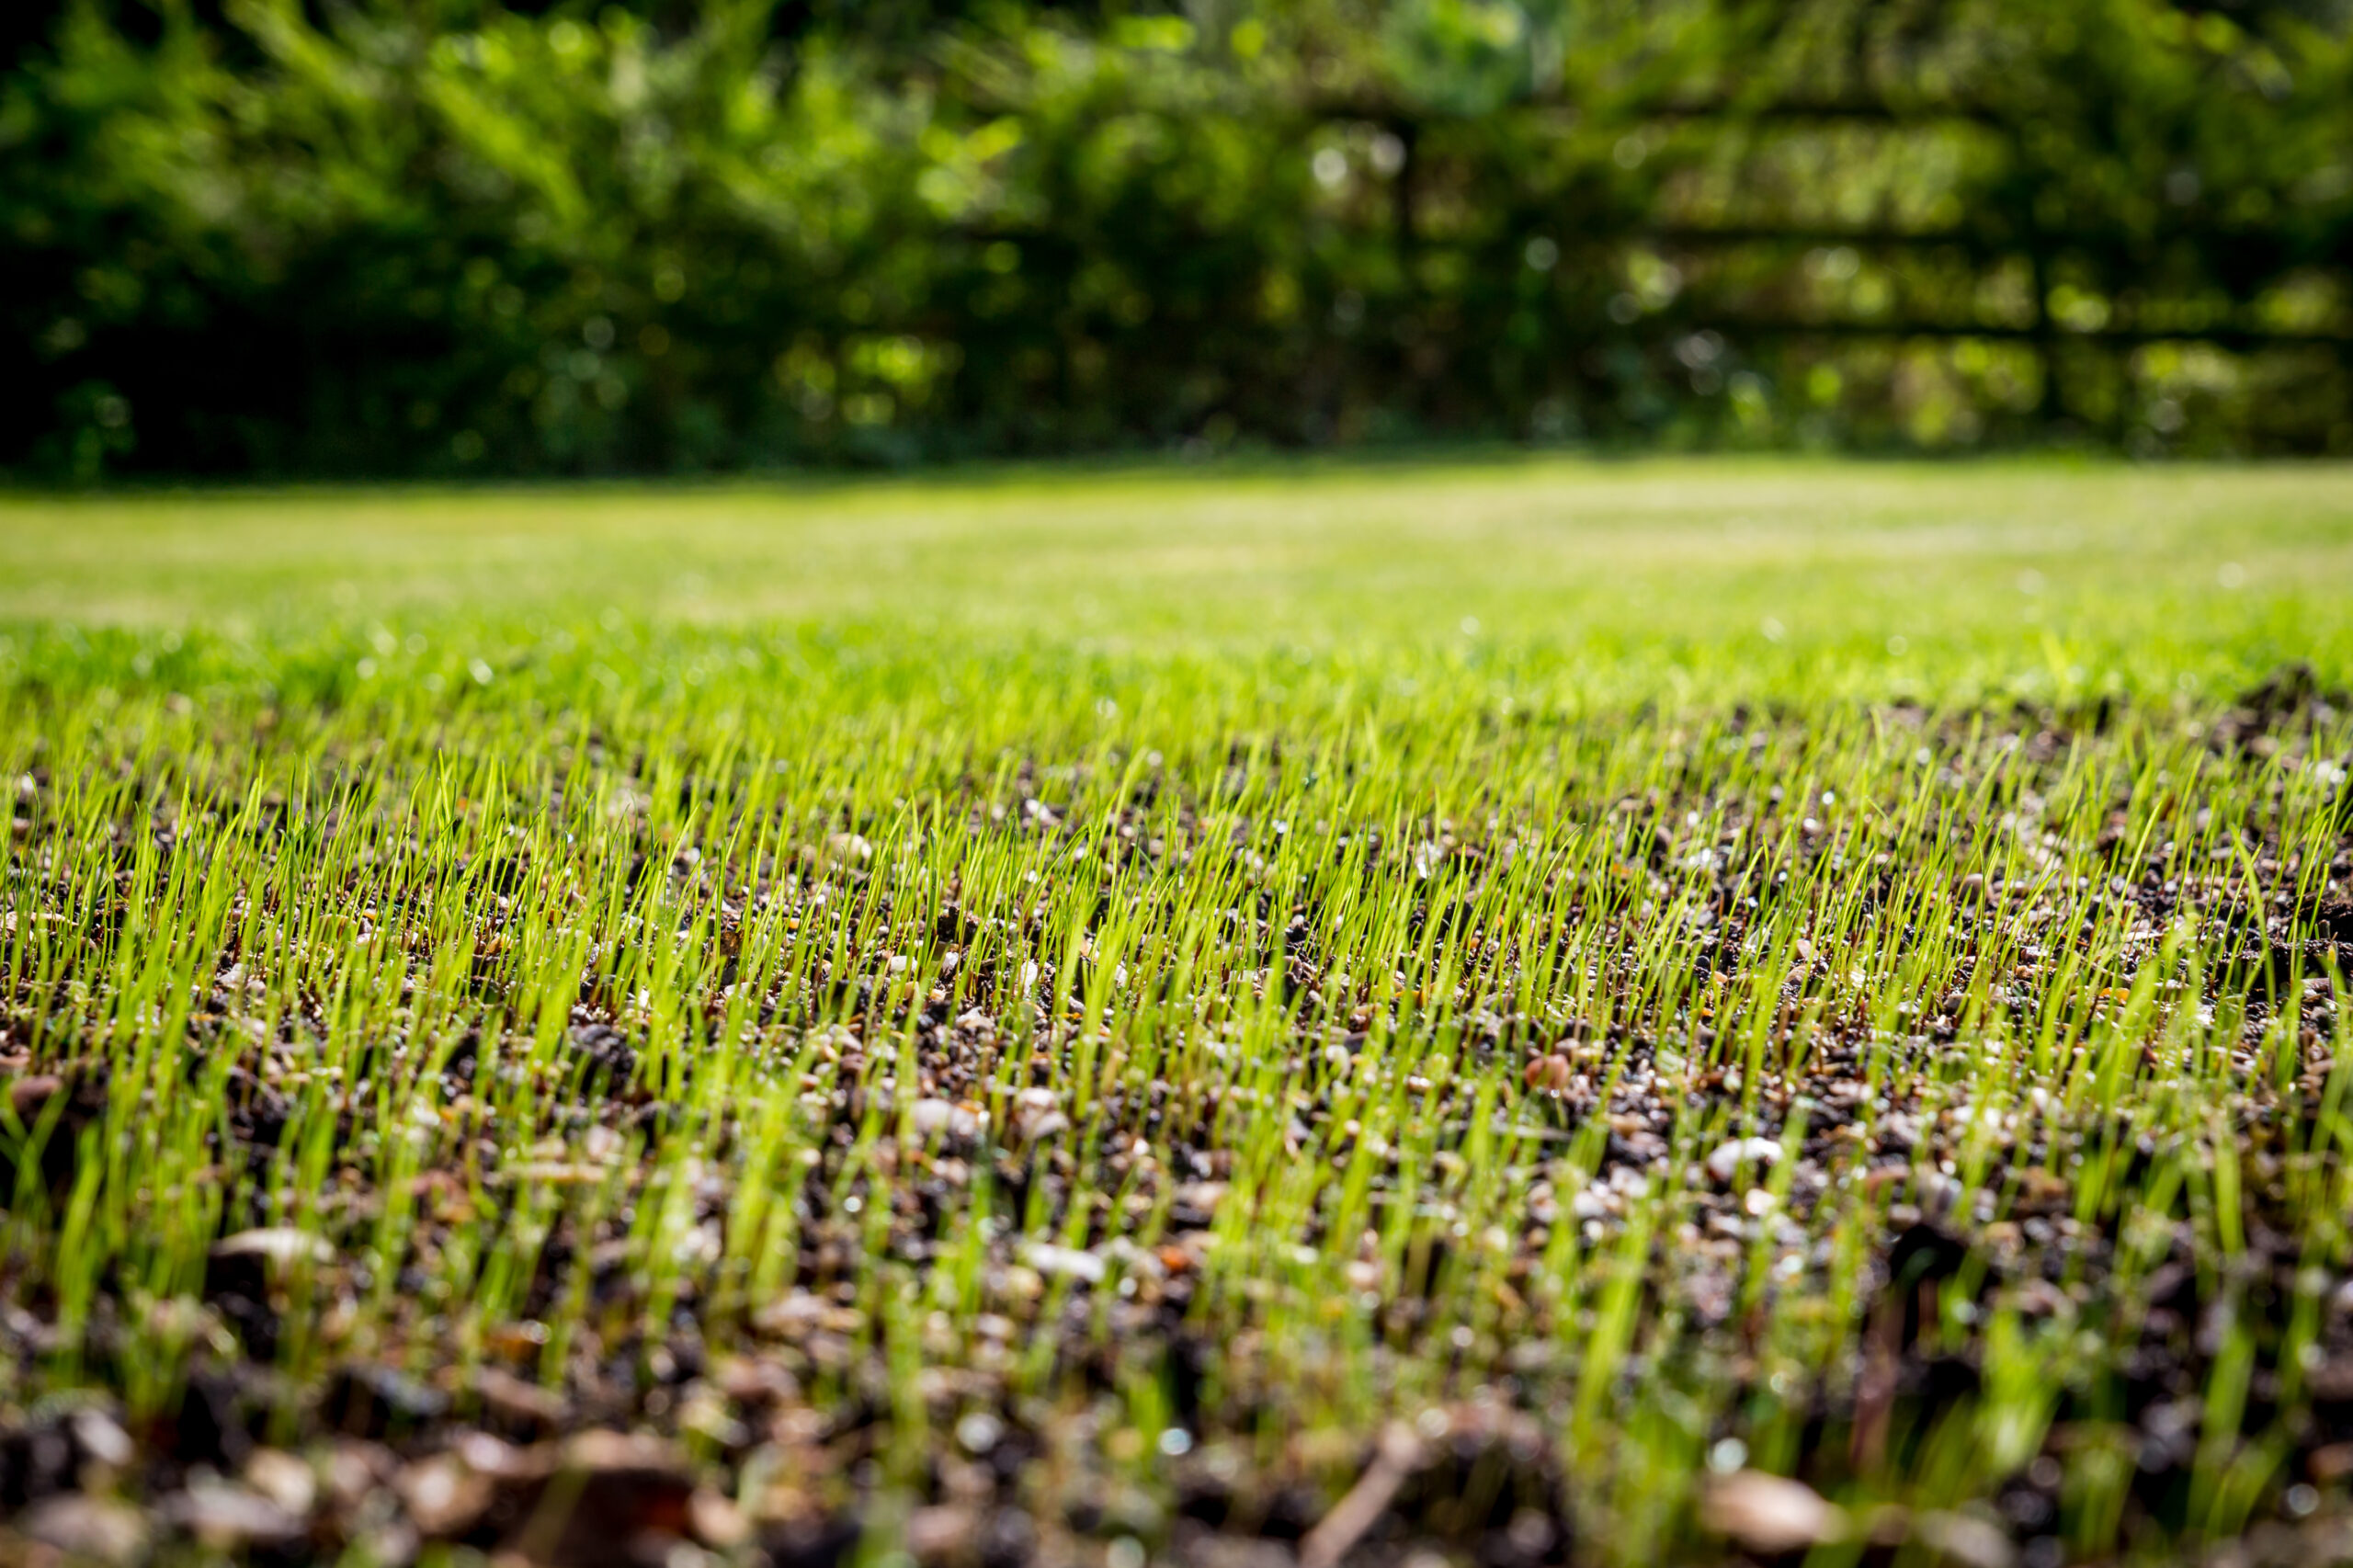 Sowing lawns made easy